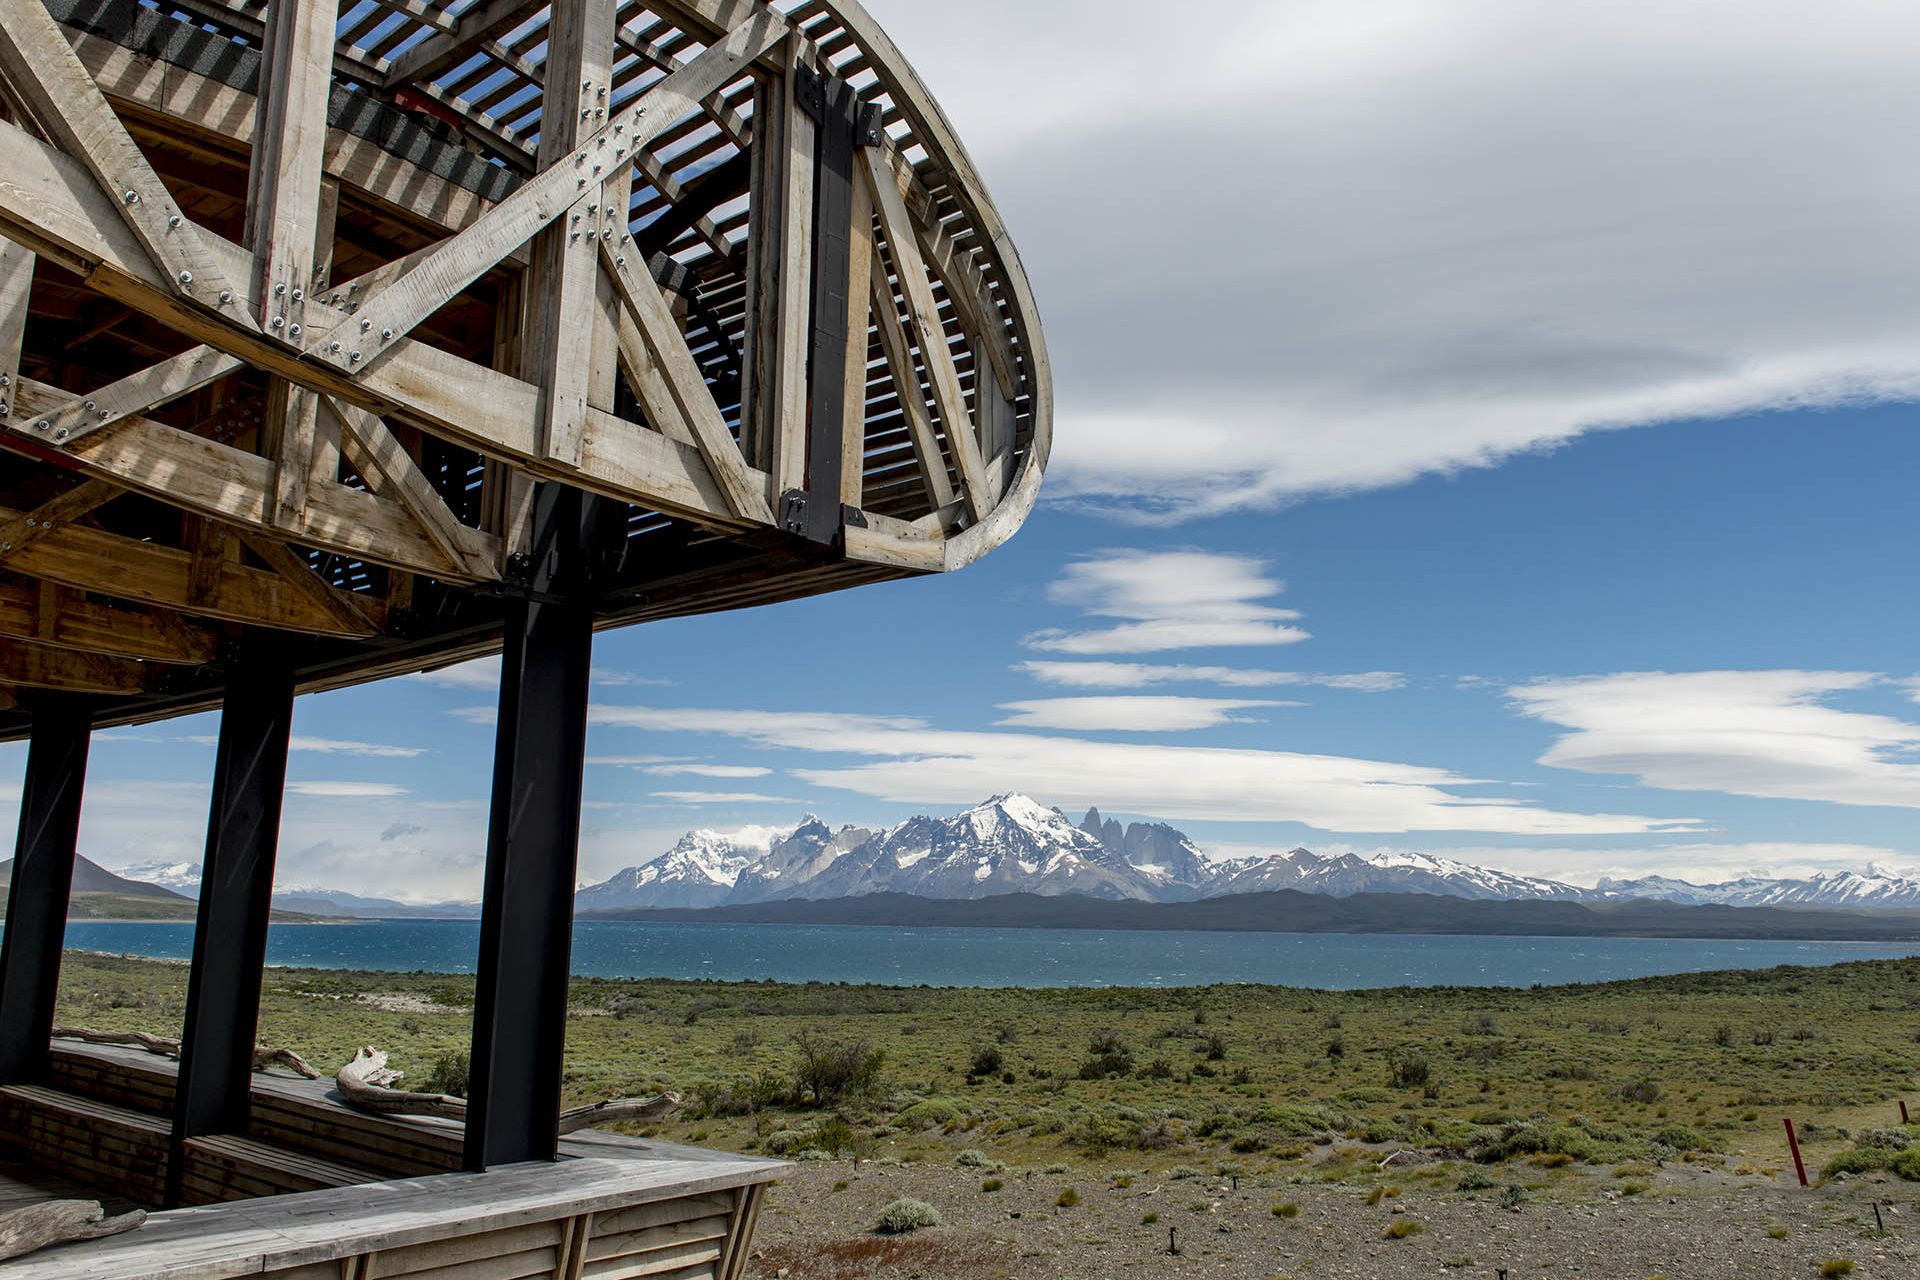 <p>This curious hotel, located in an idyllic location surrounded by nature at the northern entrance to the Torres del Paine National Park (Chile), was designed by architect Cazú Zegers. It has a curved, sinuous shape that blends with the landscape and is entirely covered by a plank of washed beech wood.</p>